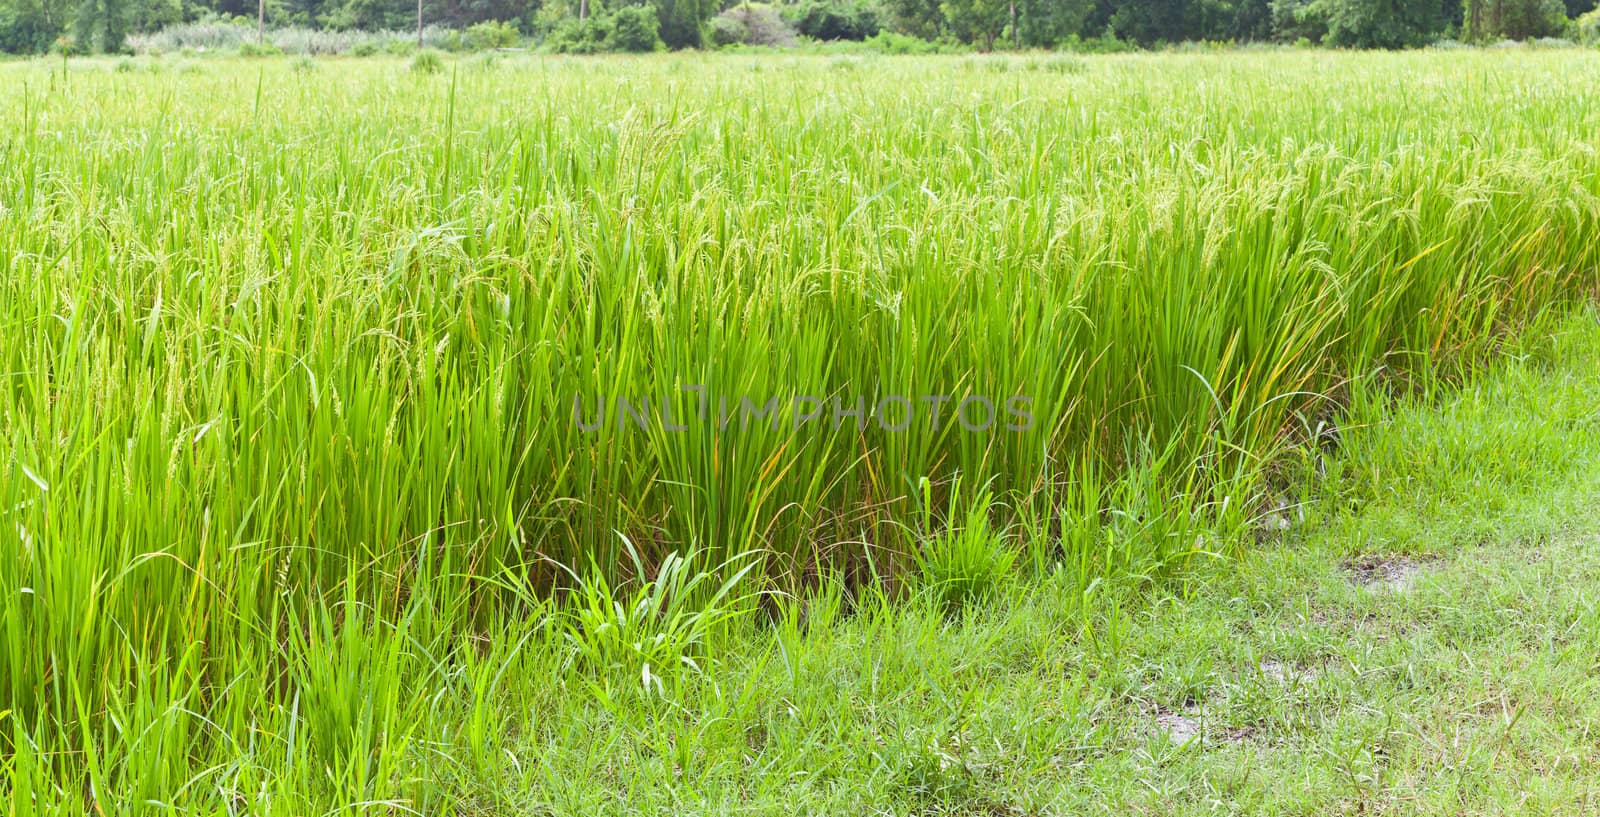 Paddy rice in field, Thailand